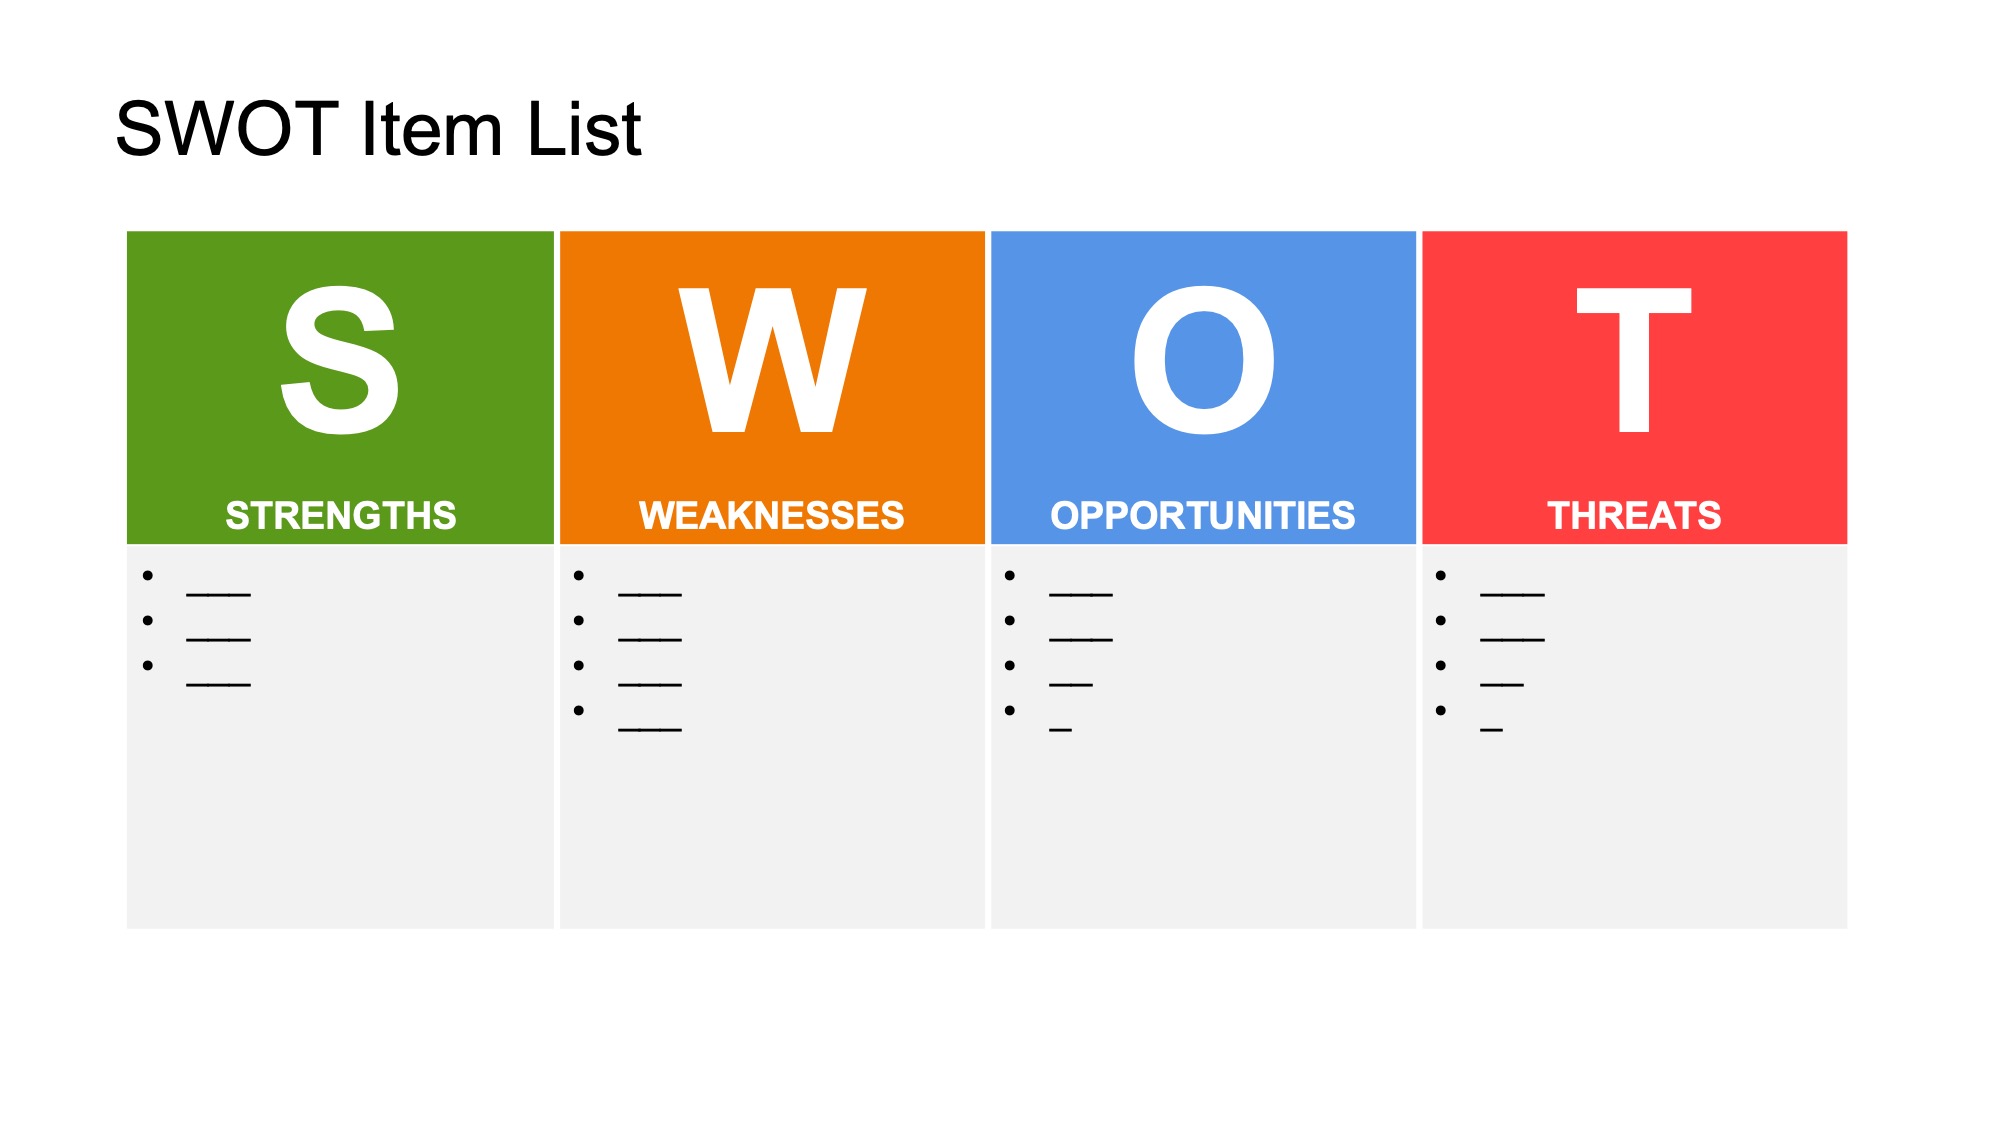 List your SWOT items